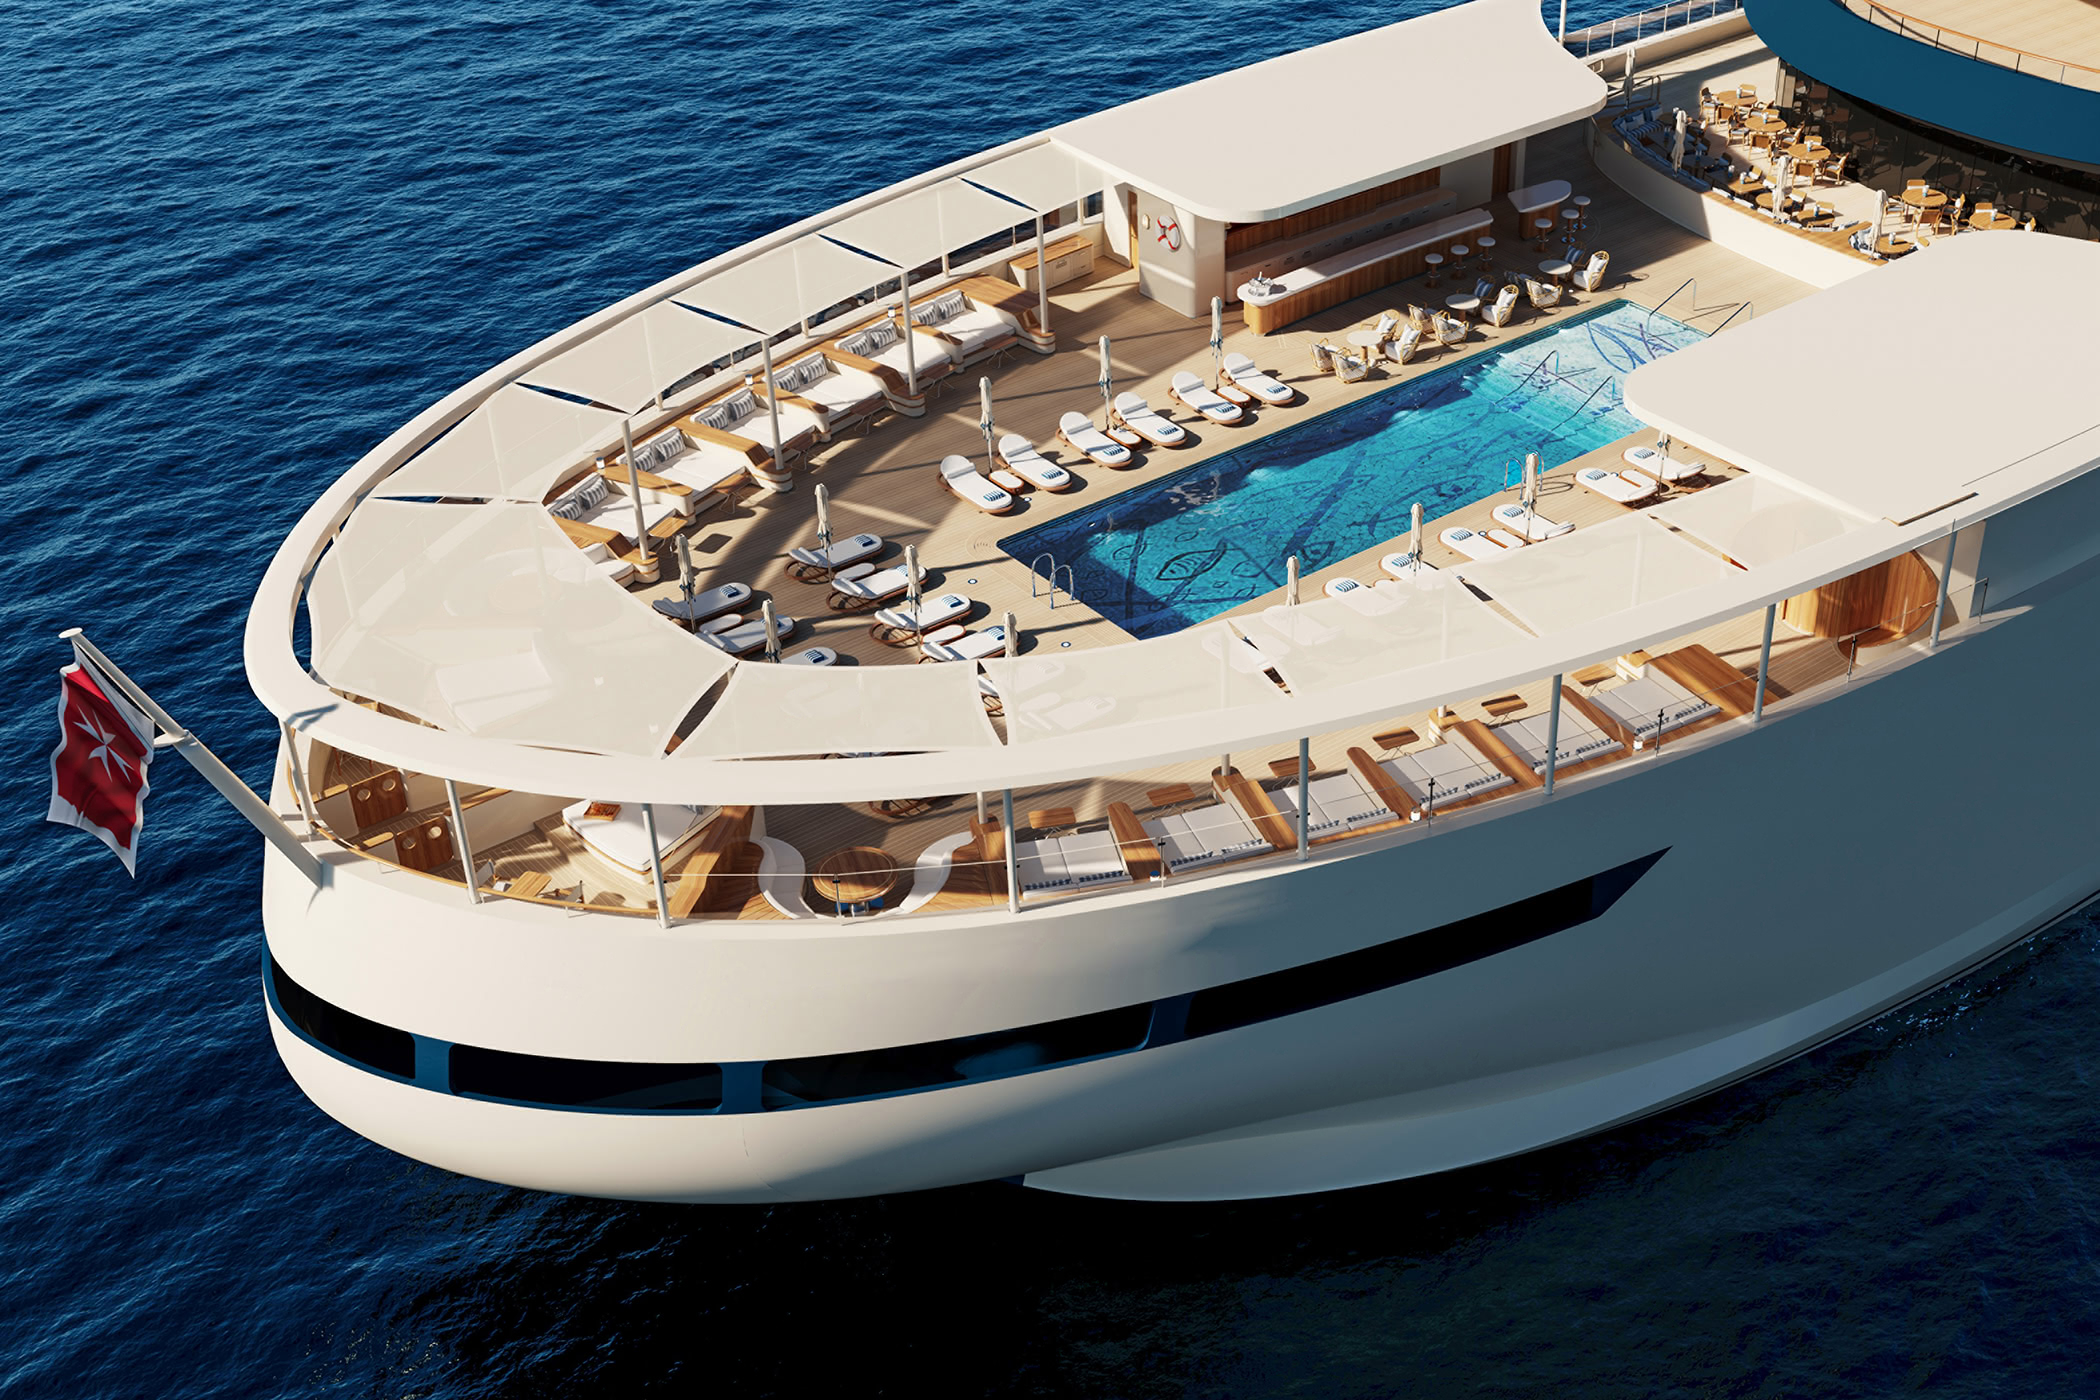 Four Seasons Yacht Pool From Above